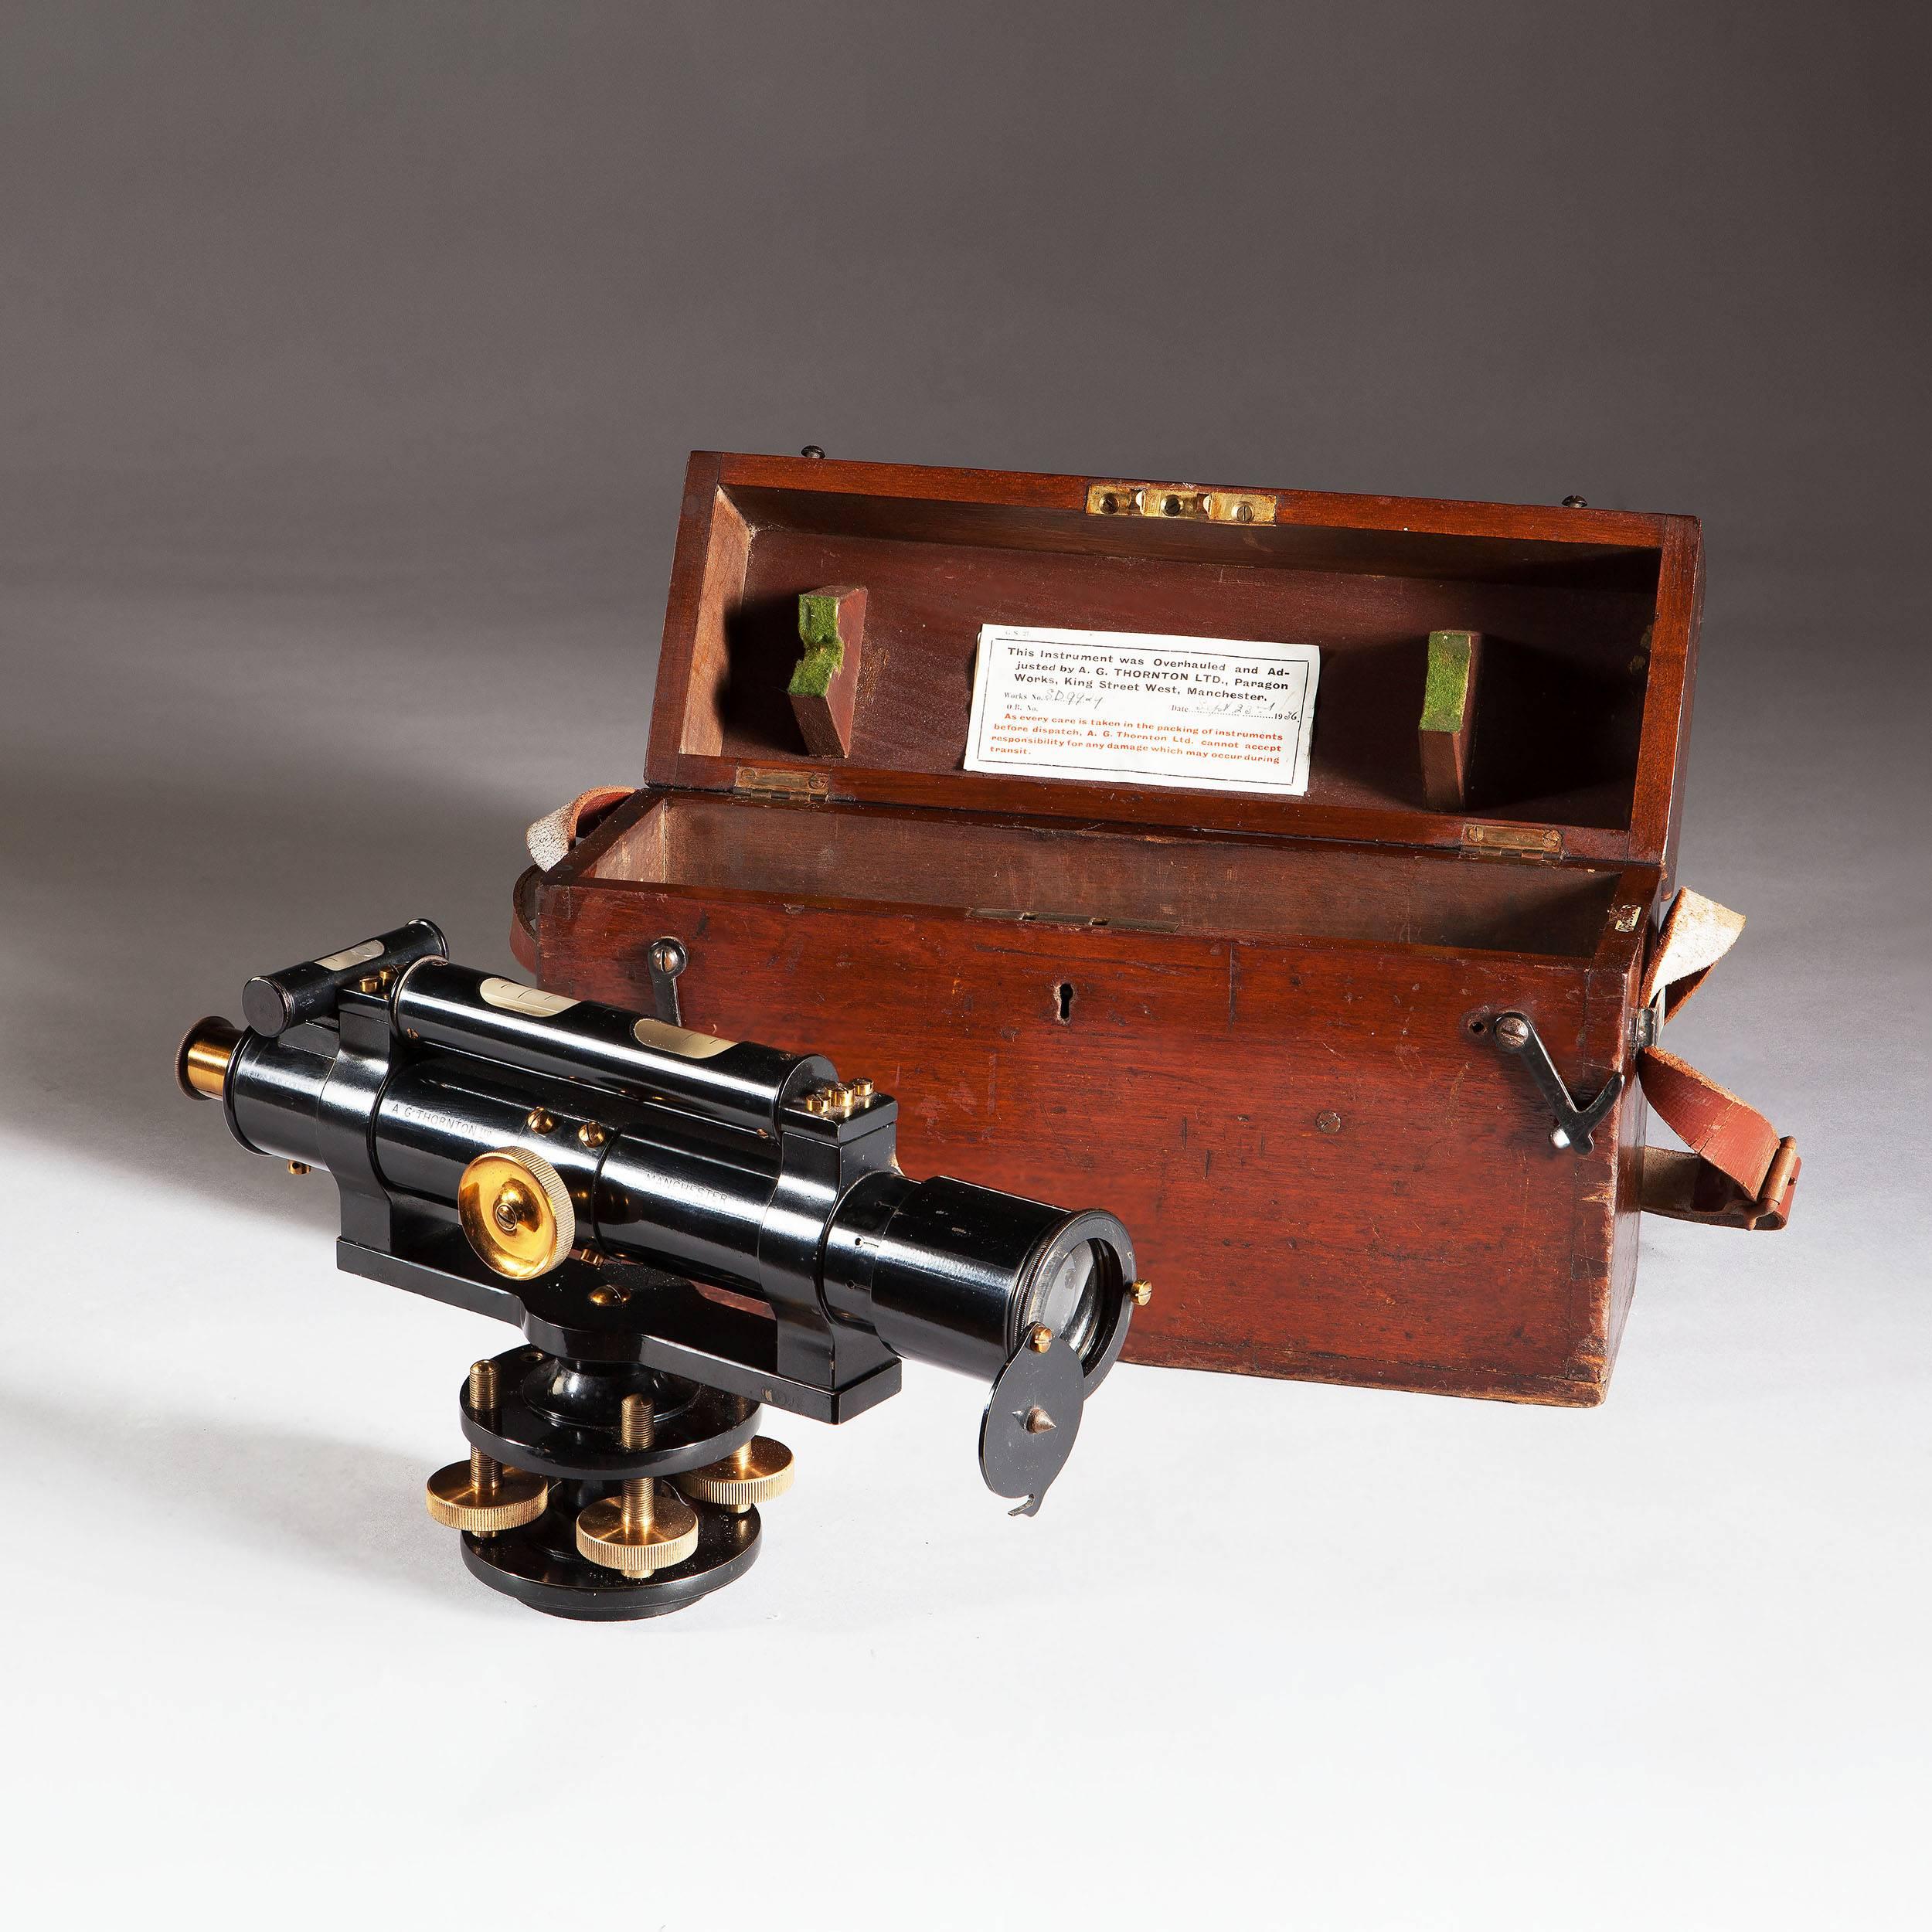 A surveyors Instrument signed and by A G Thornton of Manchester, retaining its original carrying case which has a label noting that Thornton restored the instrument in 1936.

Length 12 ins (30cms)